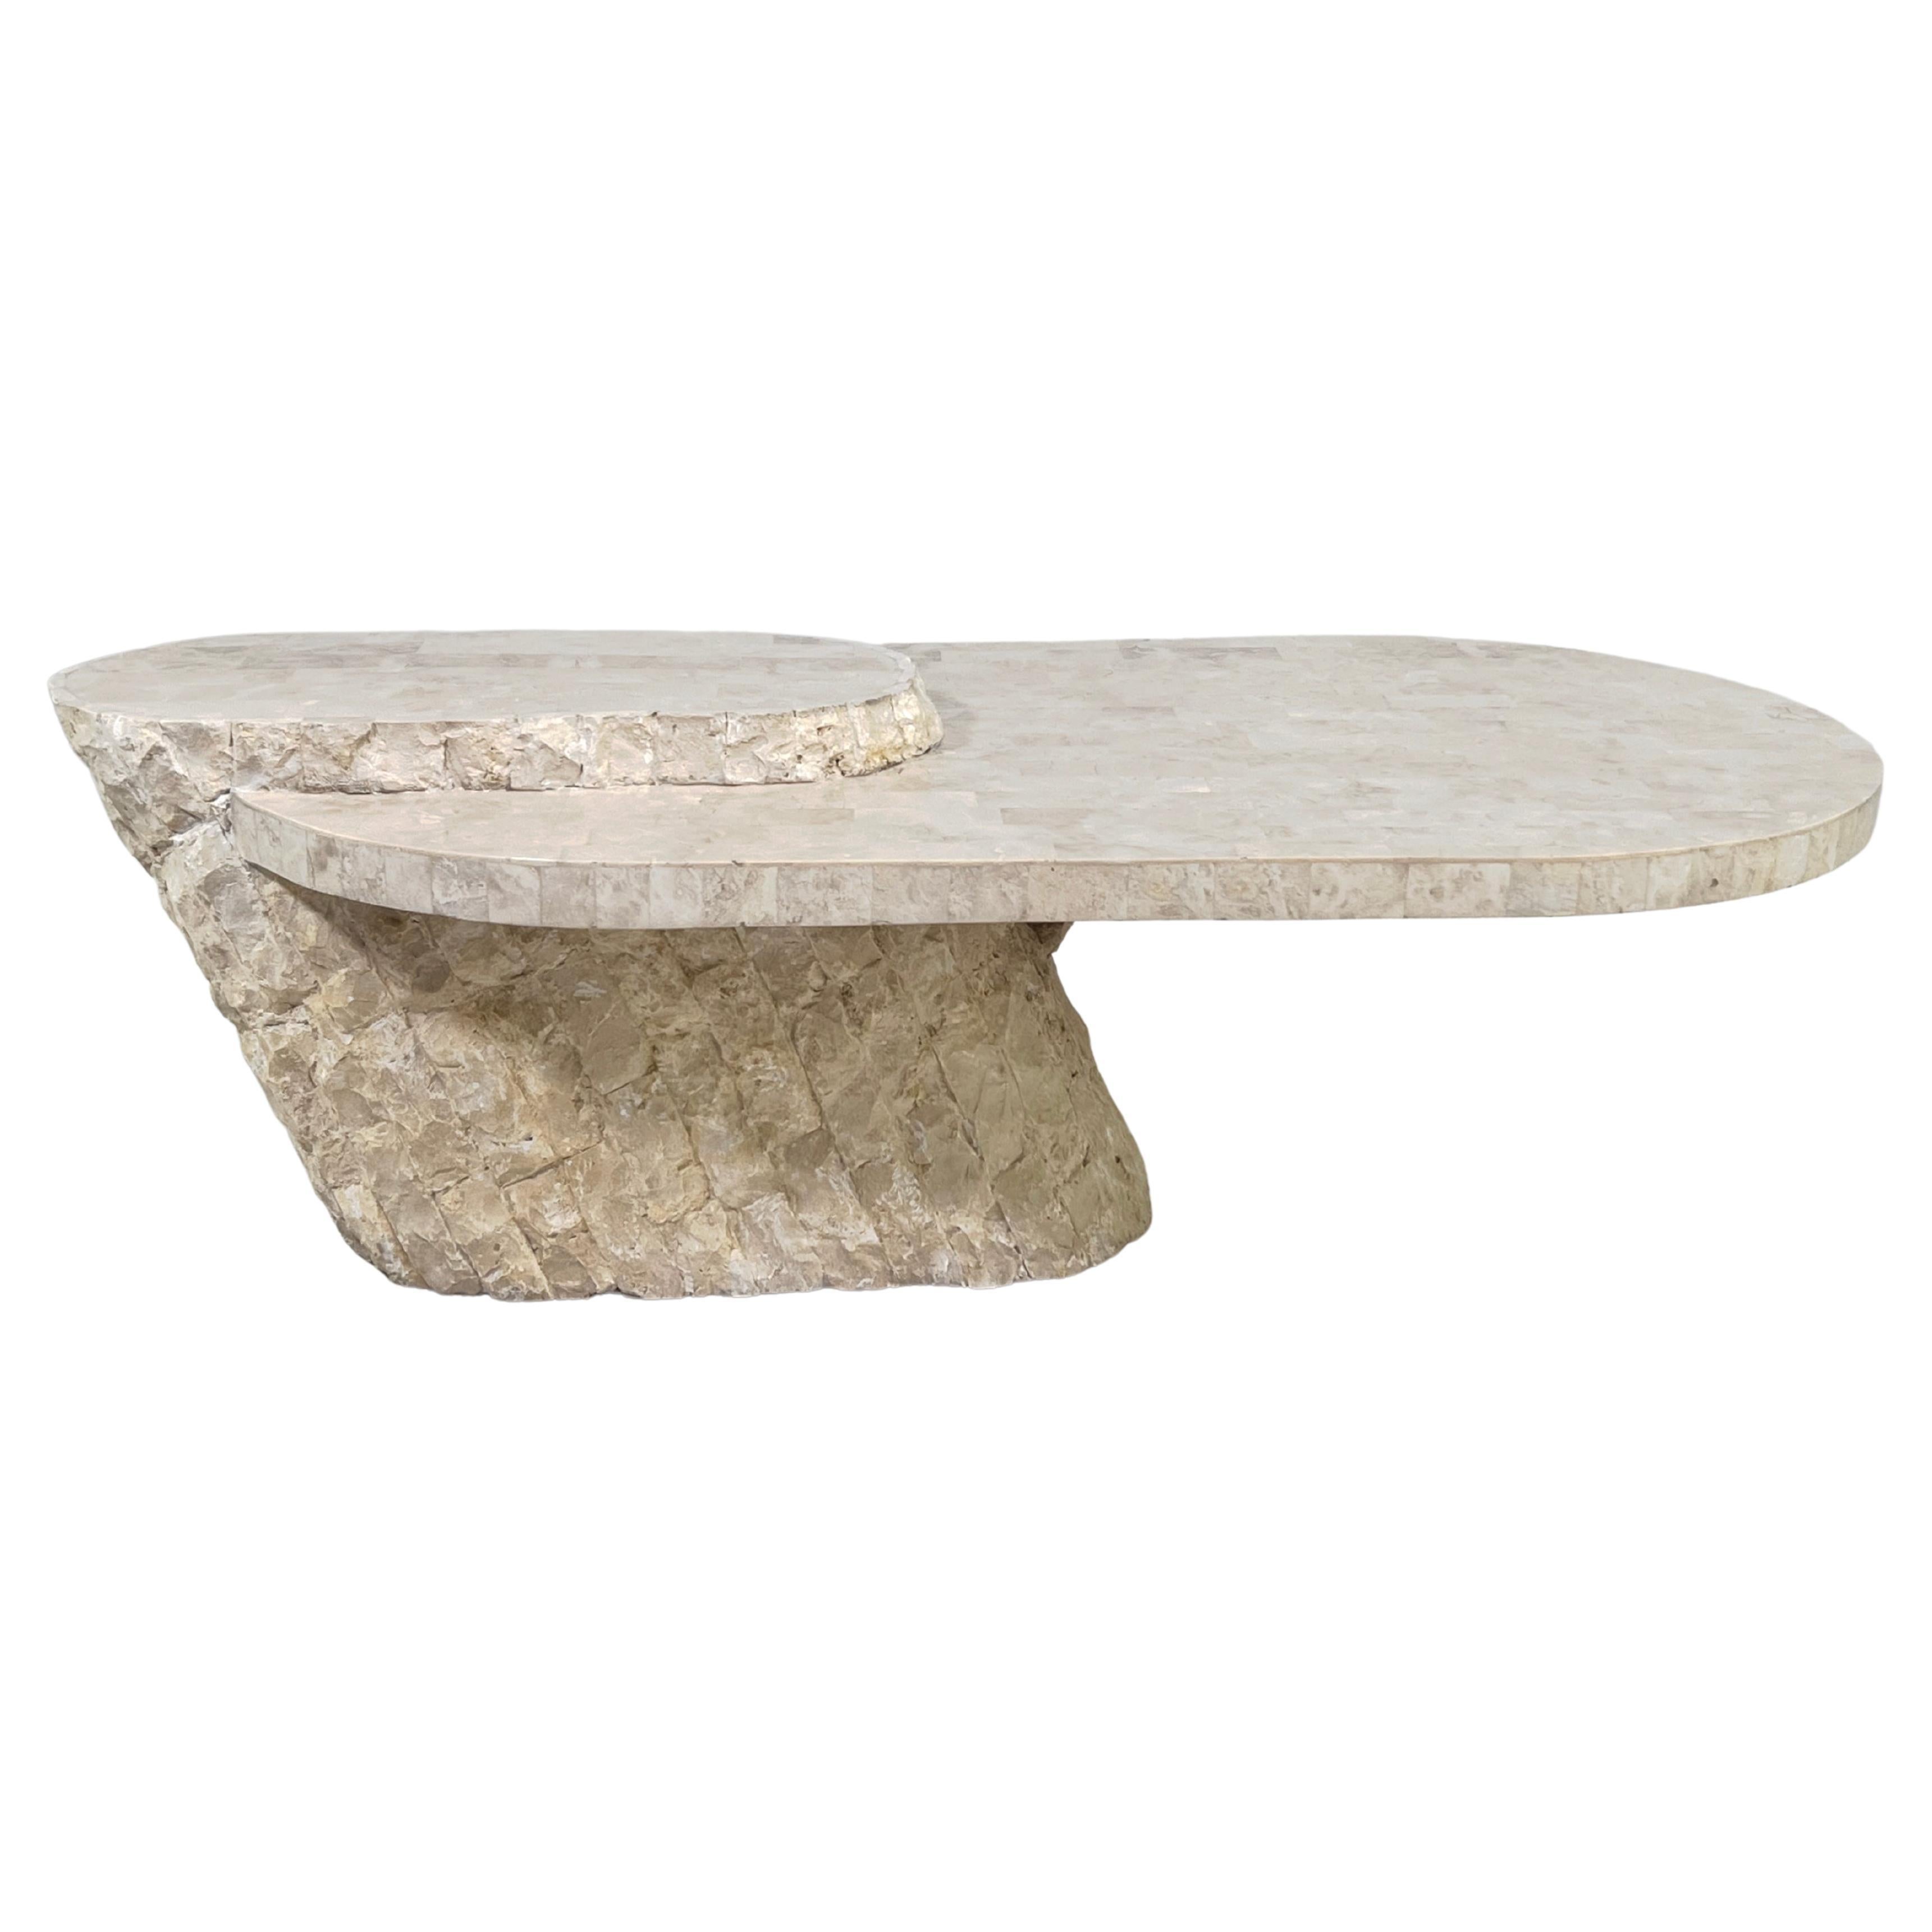 Tessellated Stone Oval Coffee Table